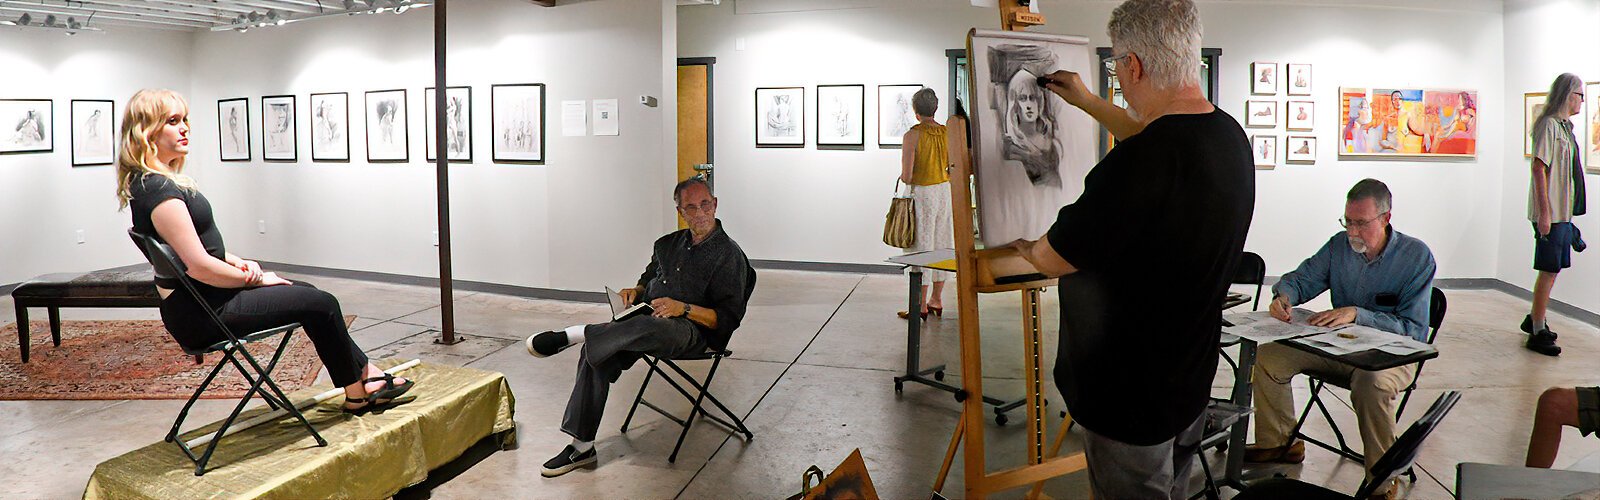 The art show in the Tully-Levine Gallery being a celebration of the human form, portrait artist Jim Kammerud does a live drawing of a young woman while encouraging visitors to draw with him.